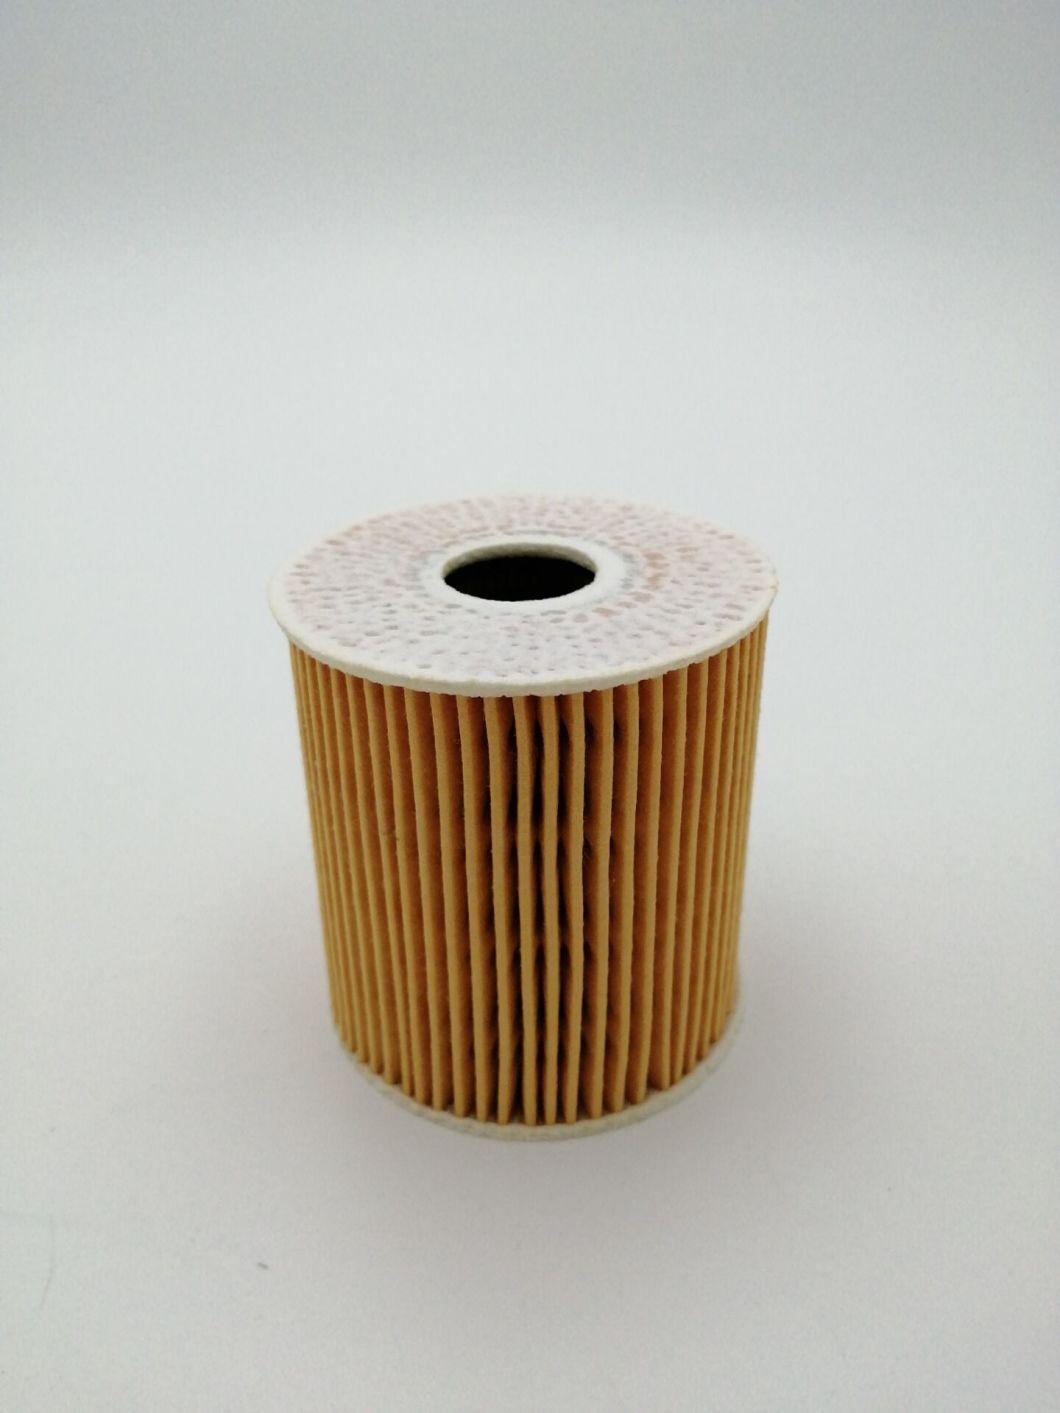 Auto Parts Filter Element Car Parts 30650798/Hu711 51X/Lr004459 Oil Filter for Land Rover